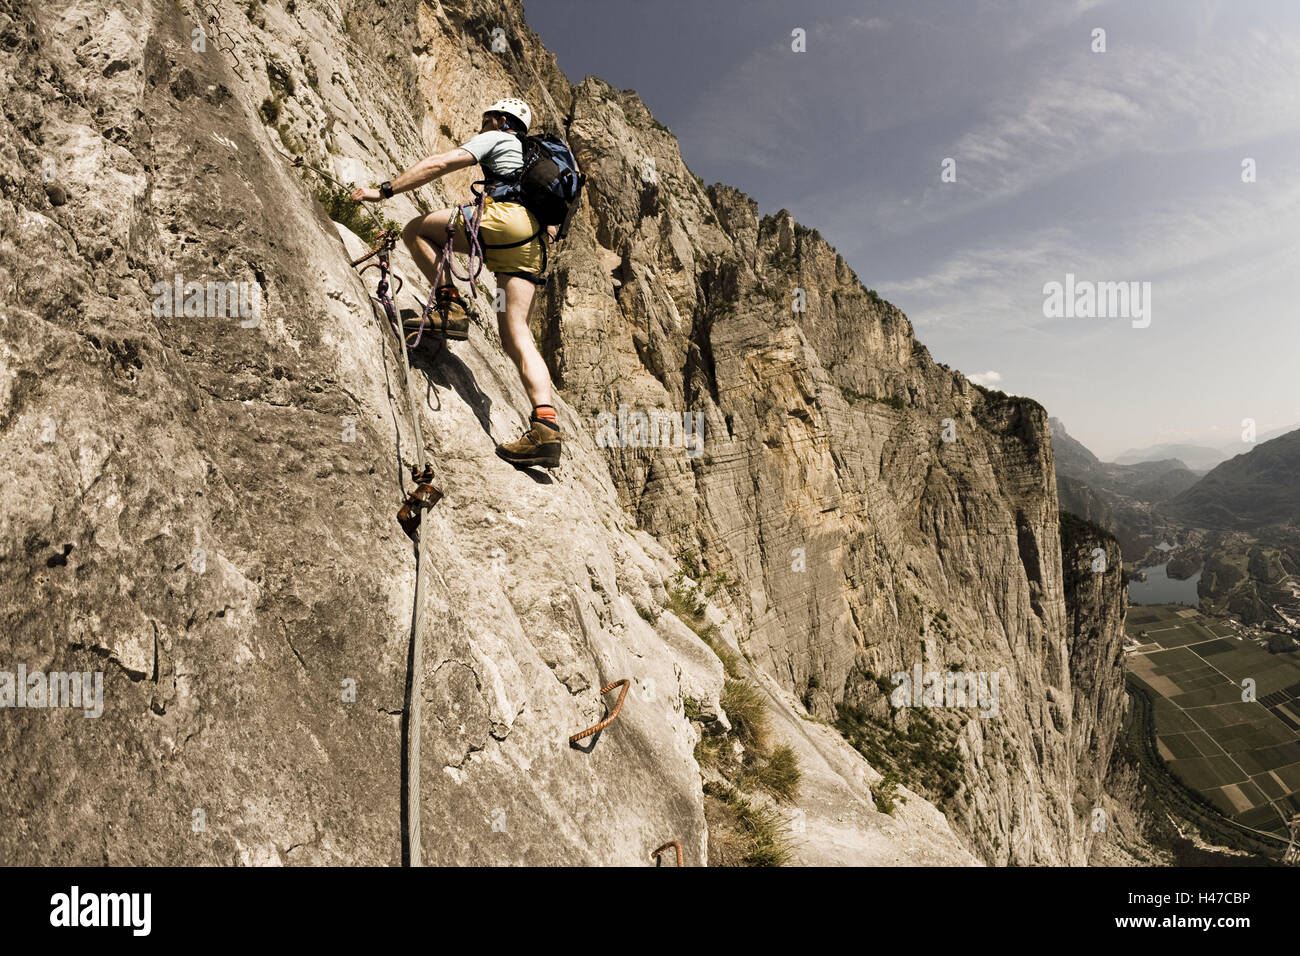 Mountaineers, cliff face, climbing steep path, rock, cliff face, steeply, have of a good head for heights, mountain sport, man, helmet, security, stop, promotion, climb, stick, strain, scenery, mountains, nature, mountains, high, On top, Gardasee, Ferrata Che Guevara, Stock Photo